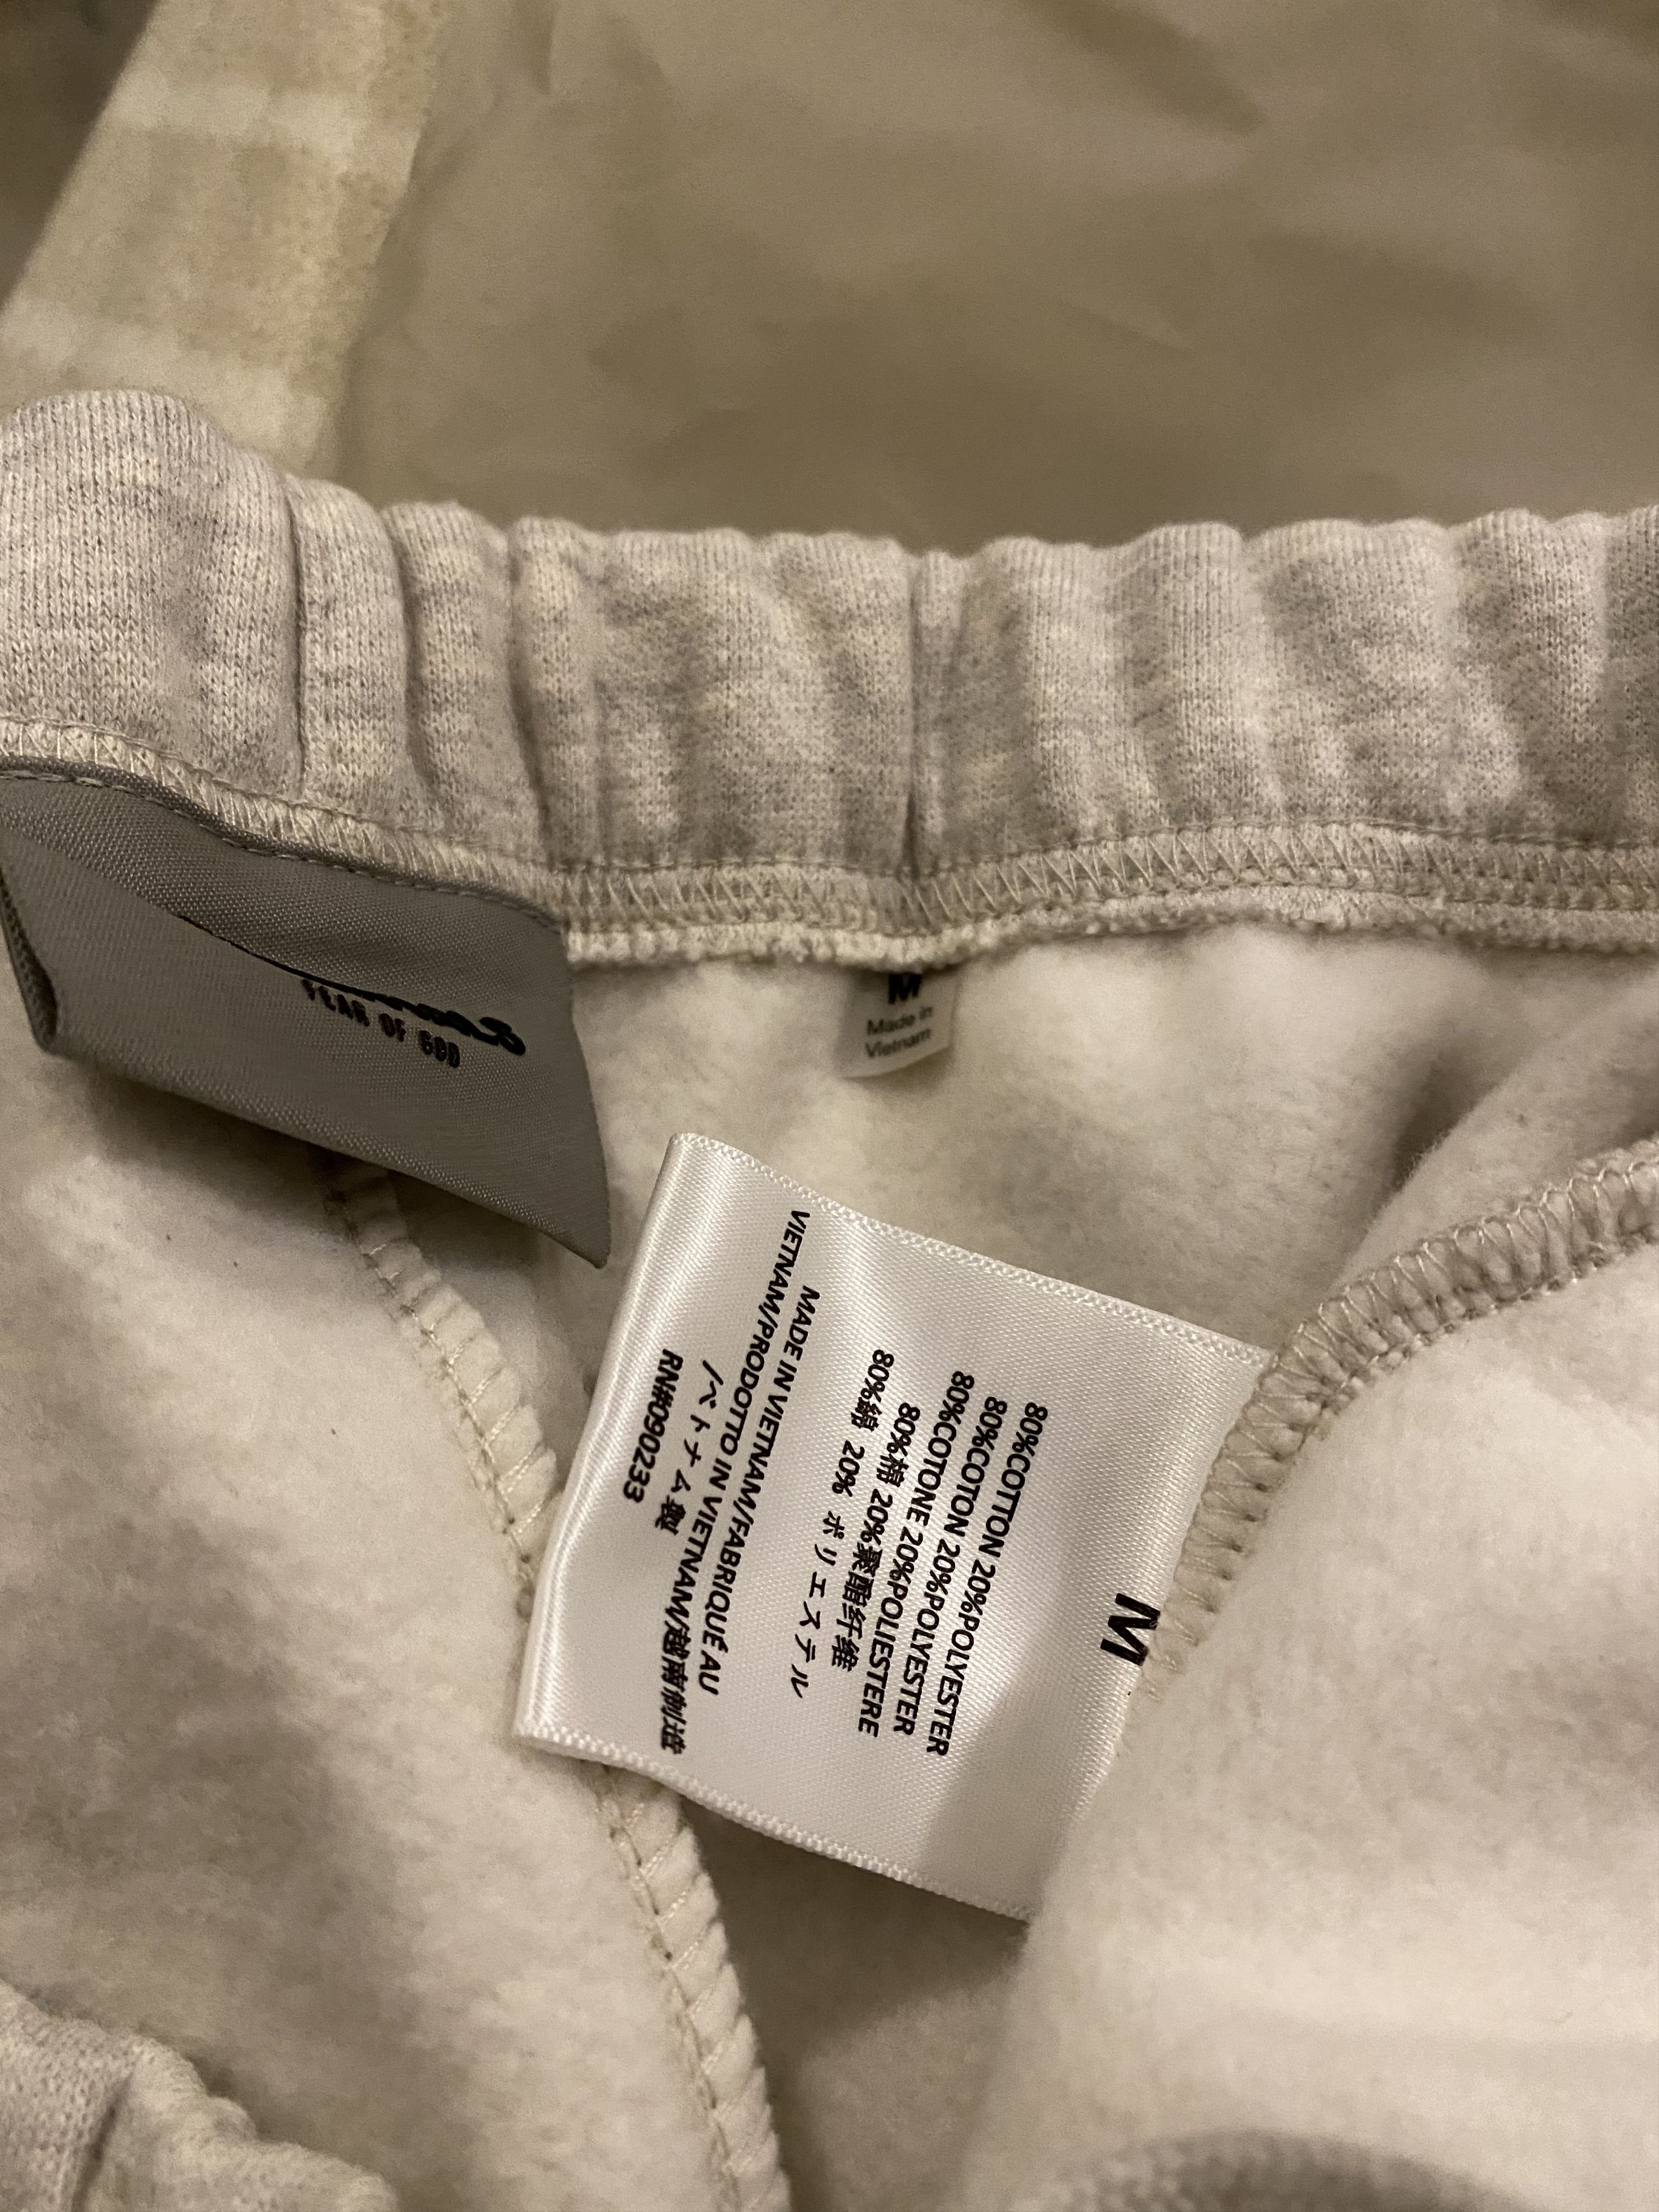 Fear of God FEAR OF GOD ESSENTIAL SWEATPANTS LIGHT HEATHER OATMEAL Size US 32 / EU 48 - 6 Preview